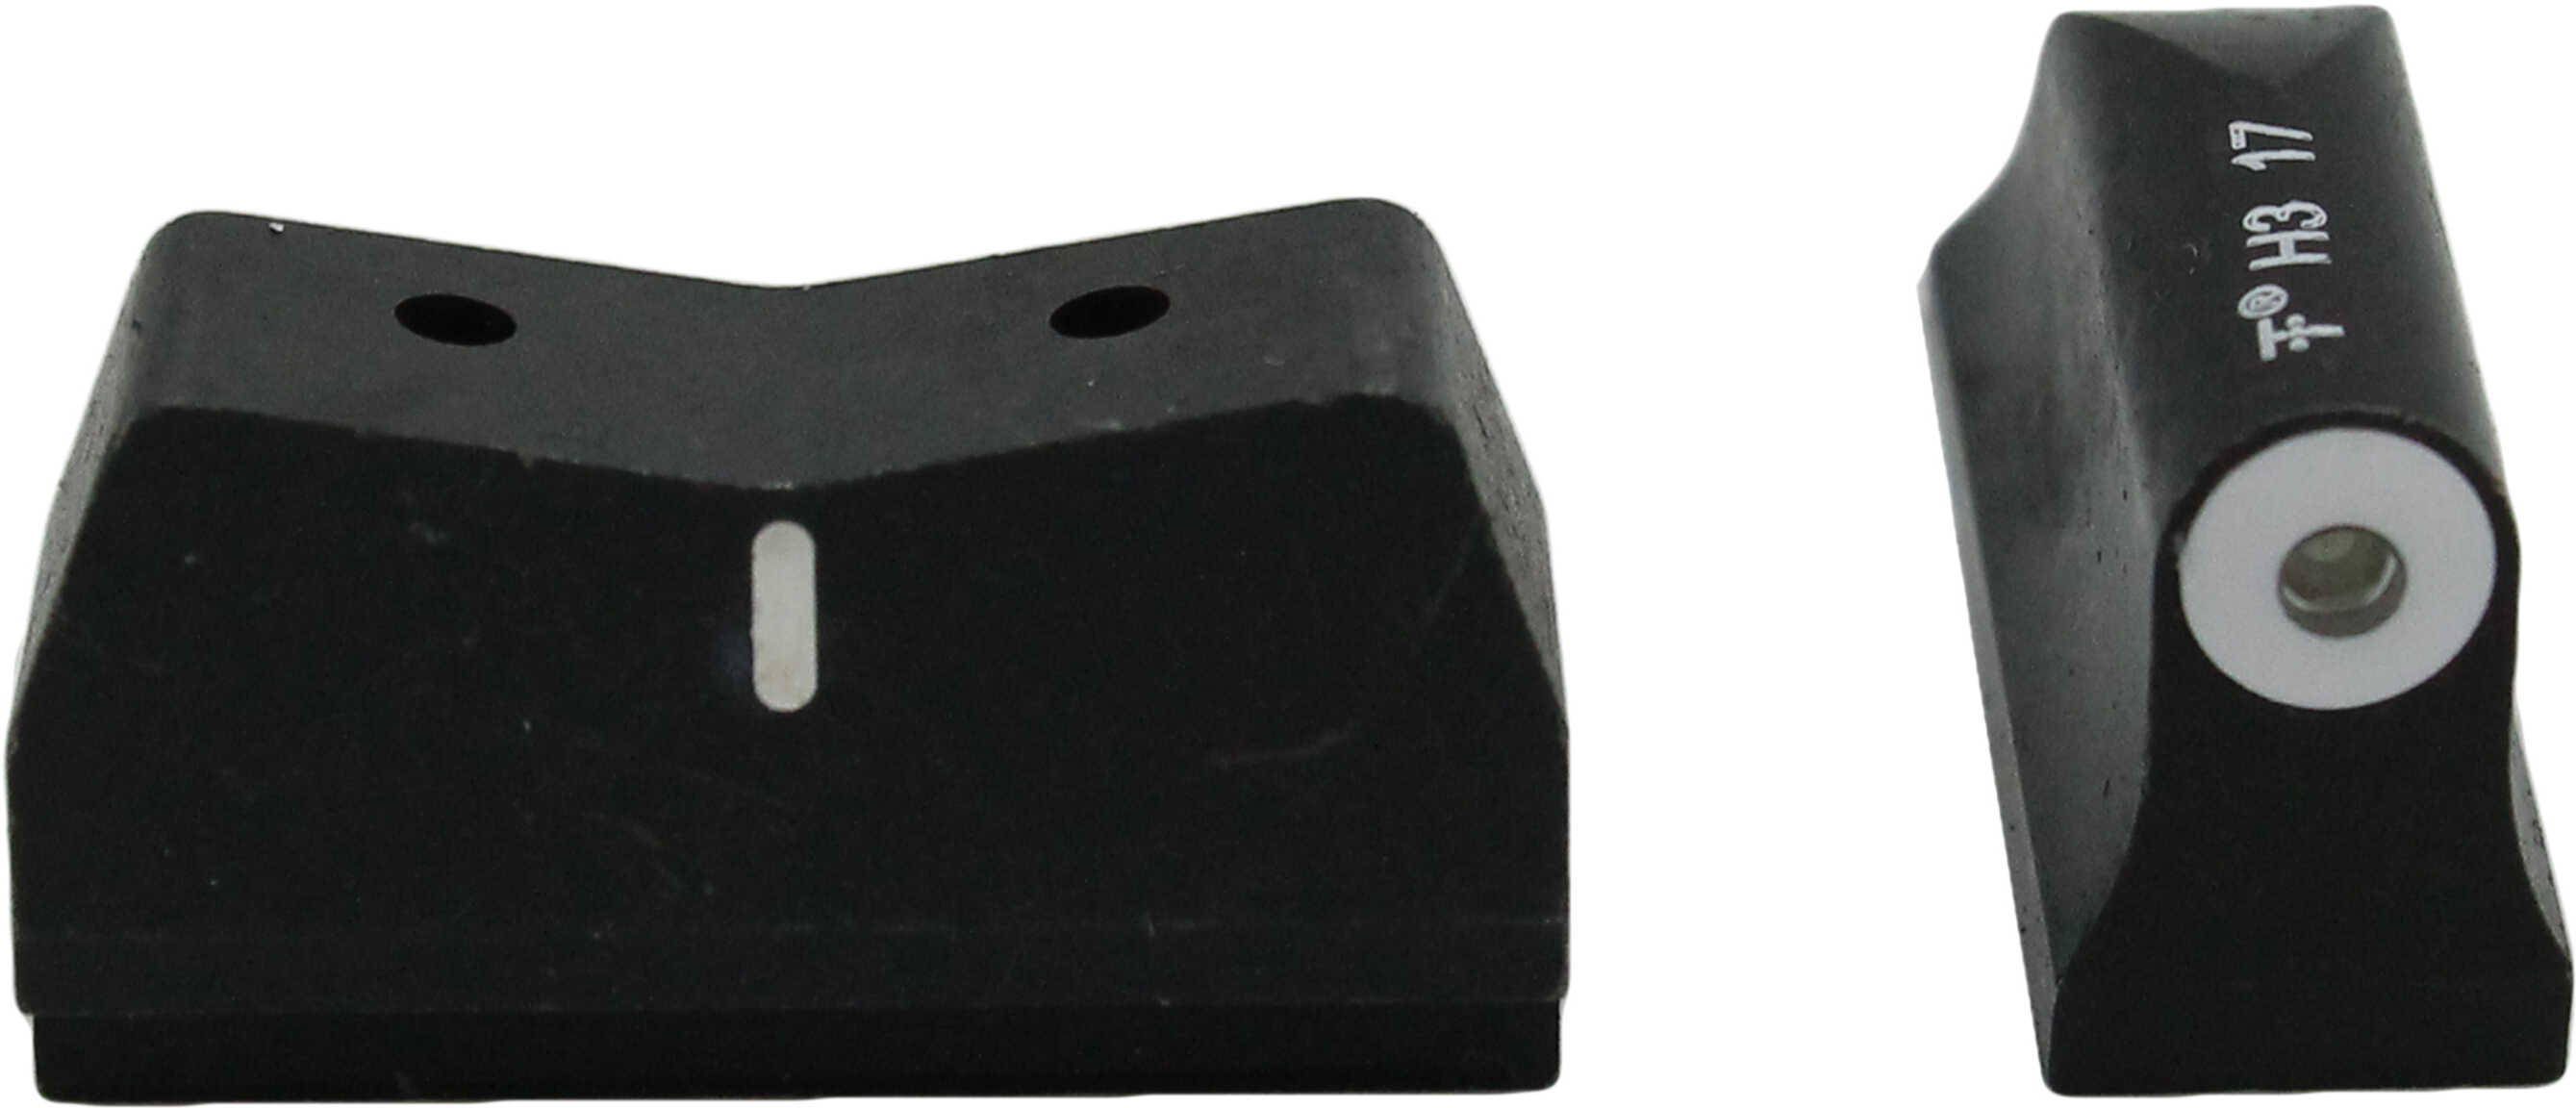 XS Sight Systems DXW Big Dot for Glock Sup Hgt 17 Small Md: GL-0004S-3